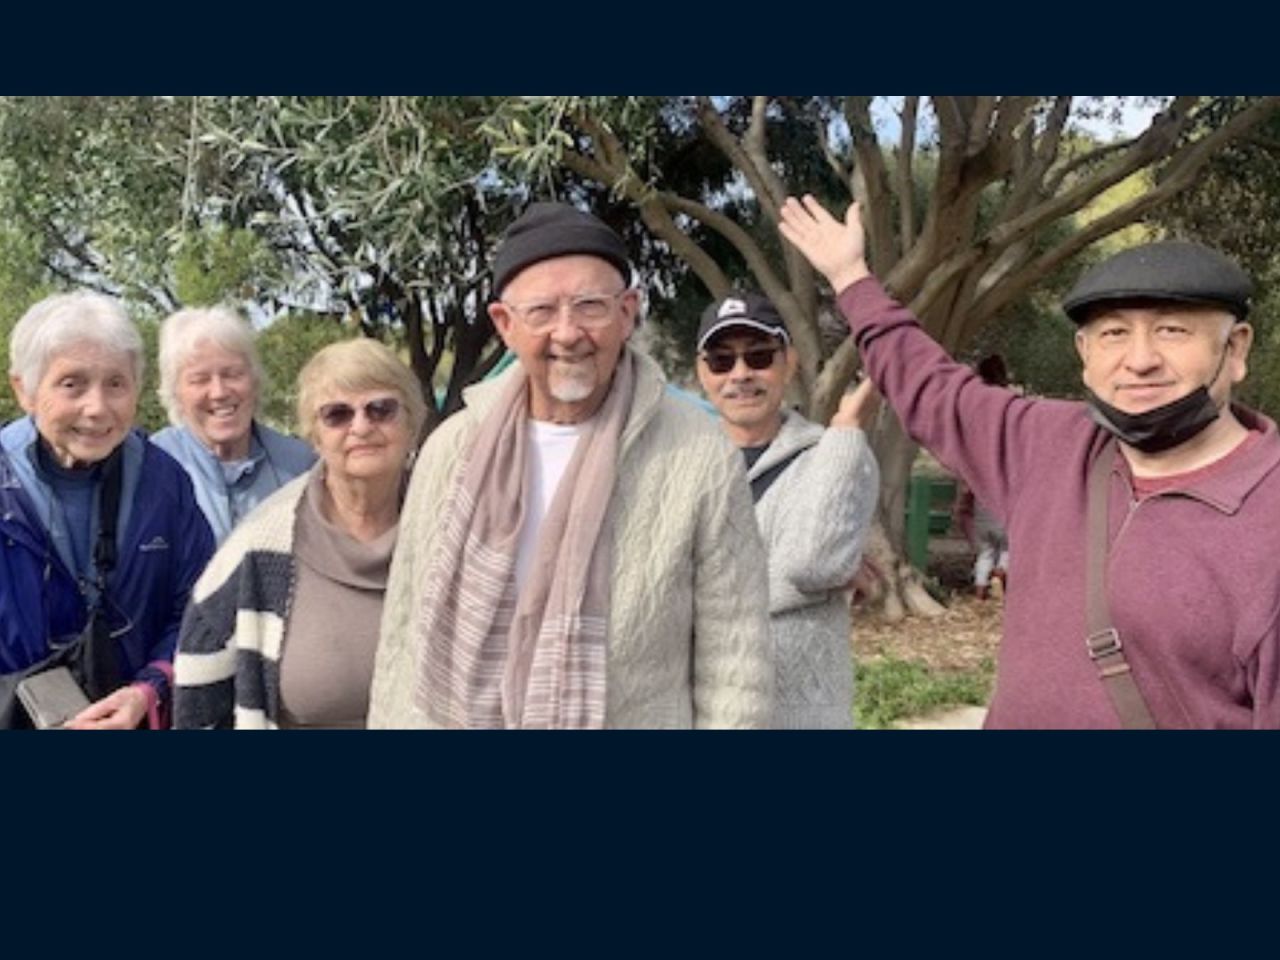 Some of our friendly NSA Perth Branch members enjoying a beautiful day investigating the impressive community veggie gardens, with recovered native plant zones, insect habitats, animal safe harbours, with turtle, frog and fish colonies. A nicer day could